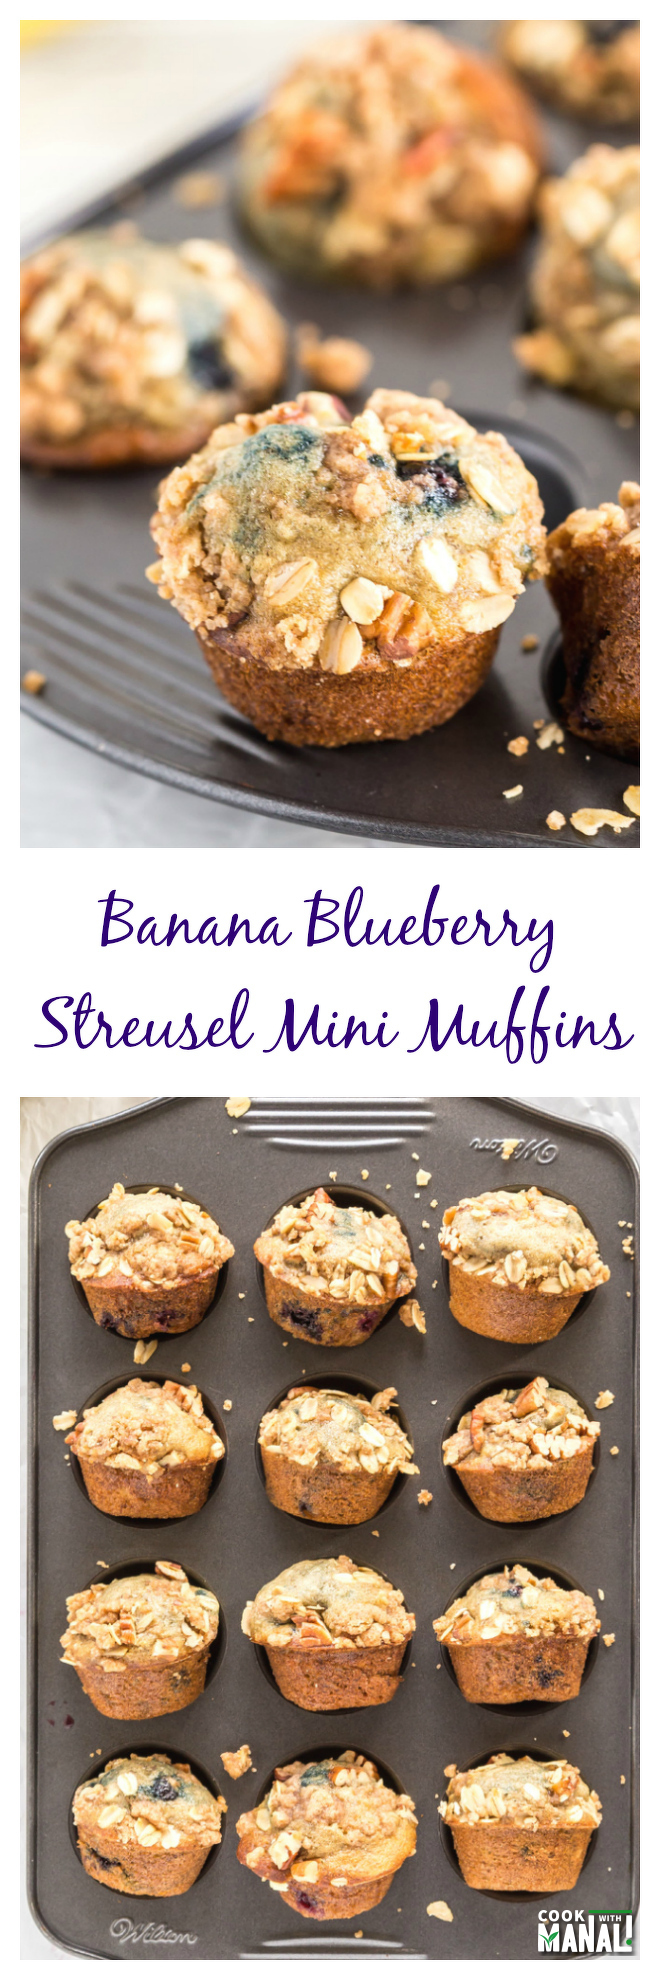 Banana Blueberry Streusel Mini Muffins Collage-1